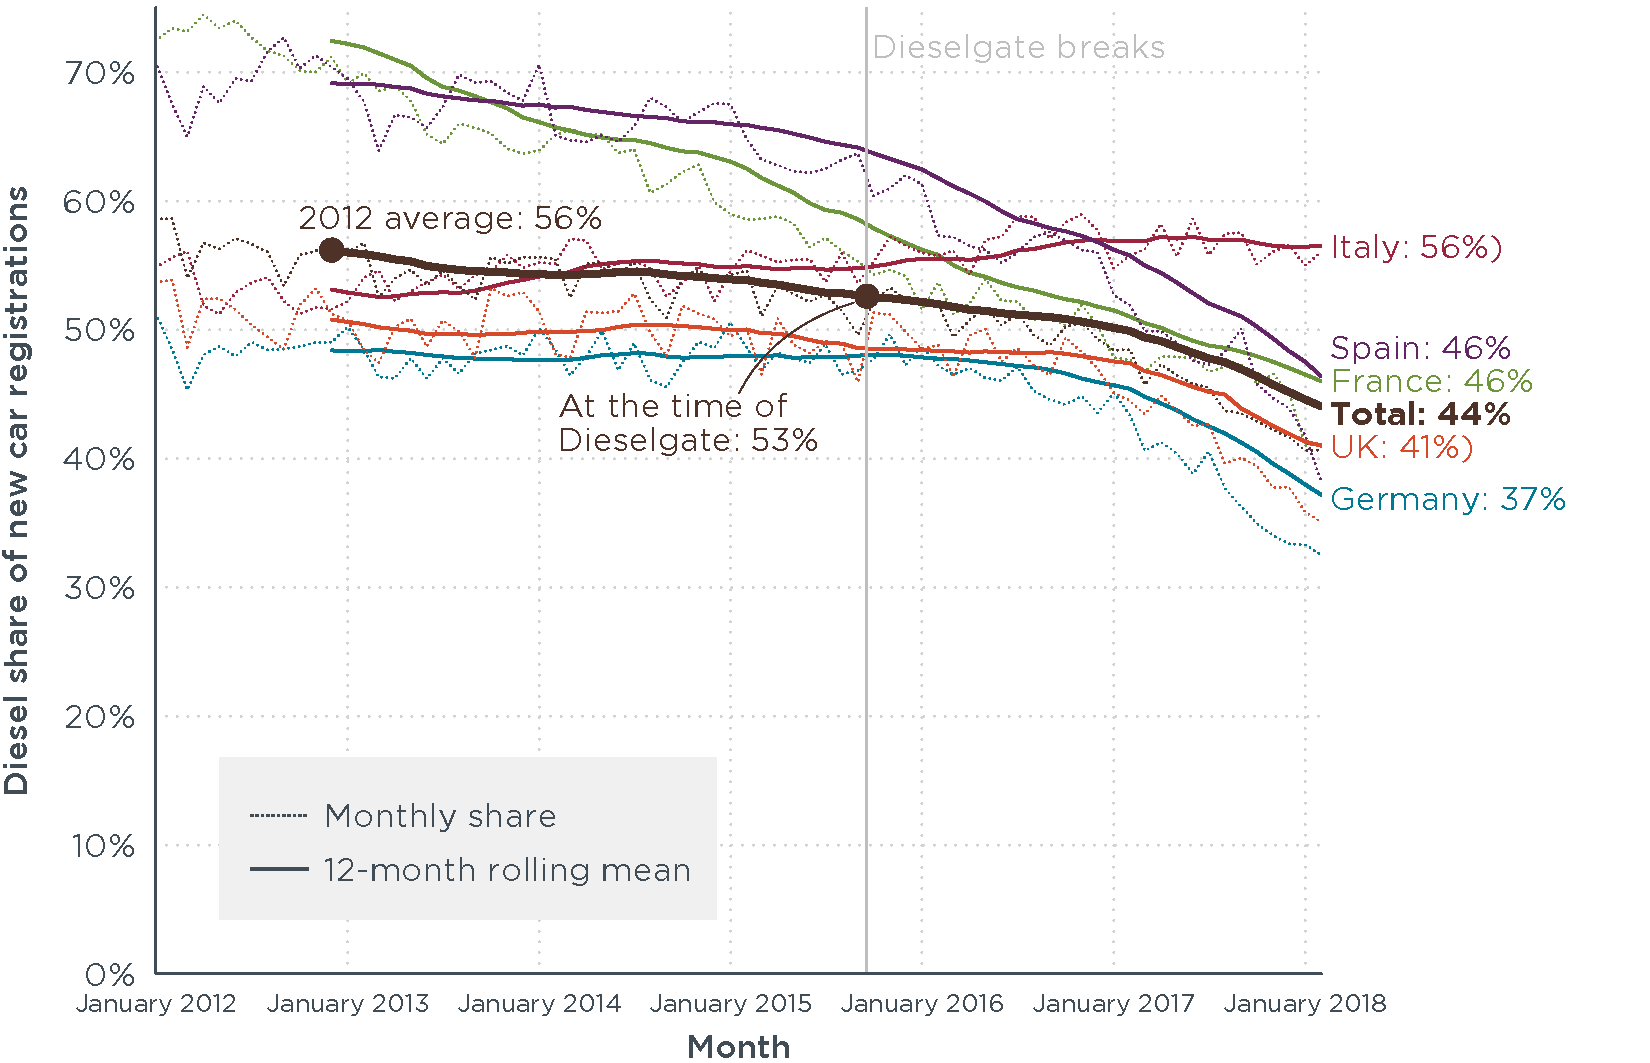 Diesel share of new car registrations in select European countries